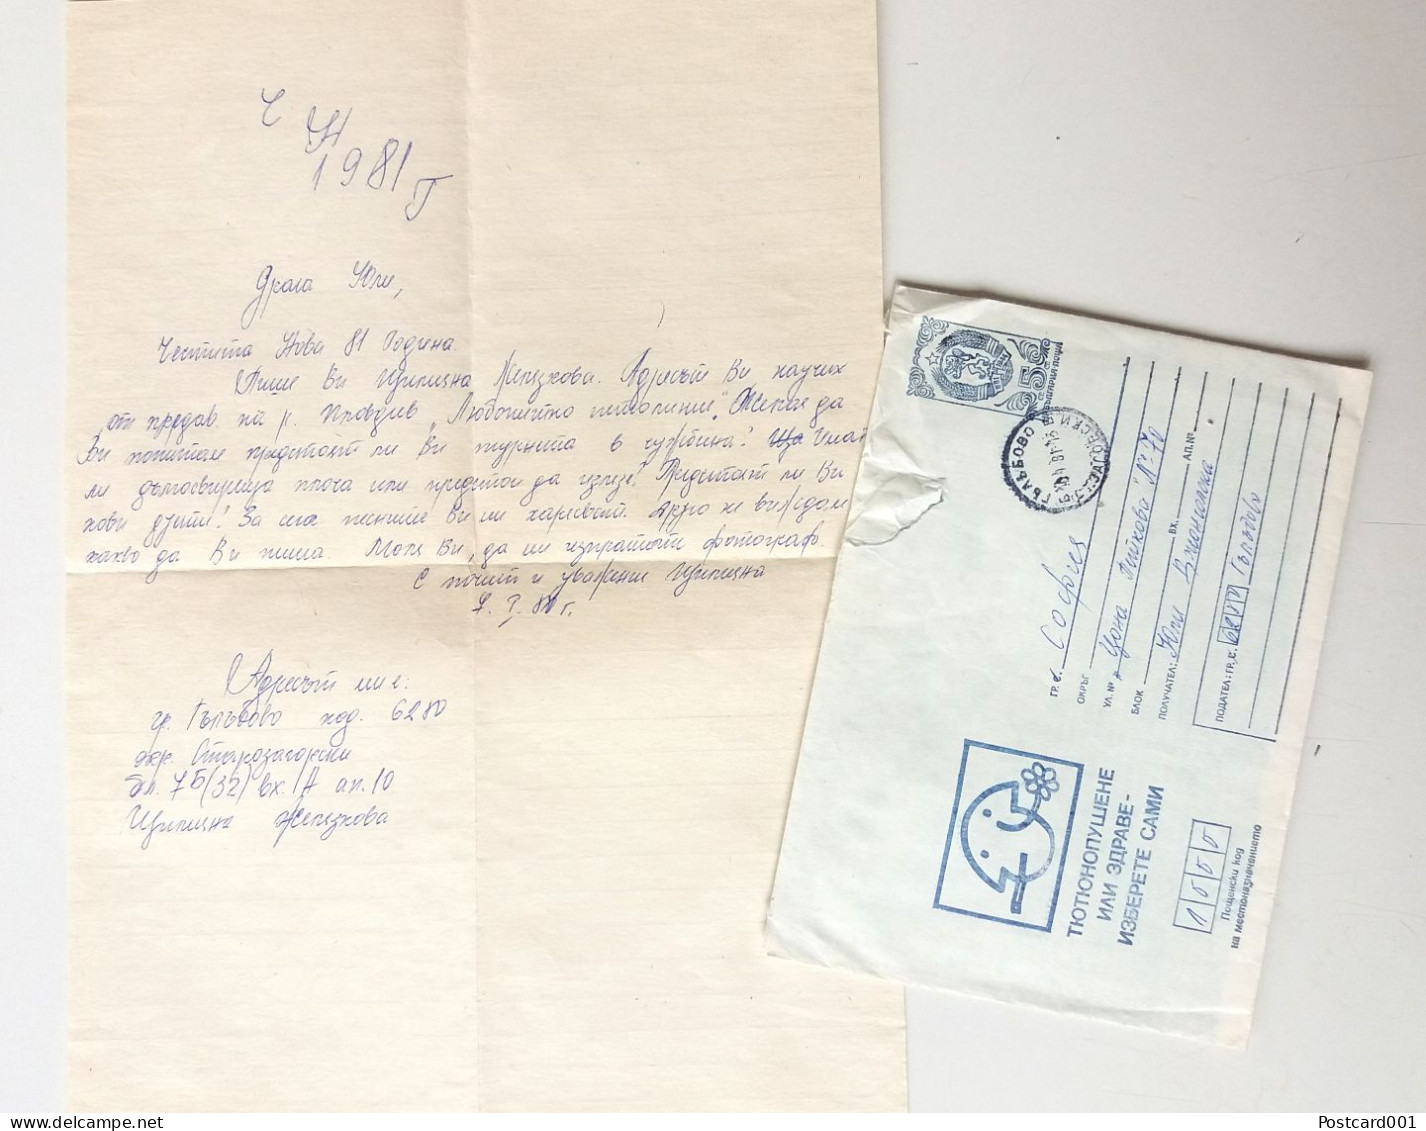 #69 Traveled Envelope And Letter Cyrillic Manuscript Bulgaria 1981 - Local Mail - Covers & Documents